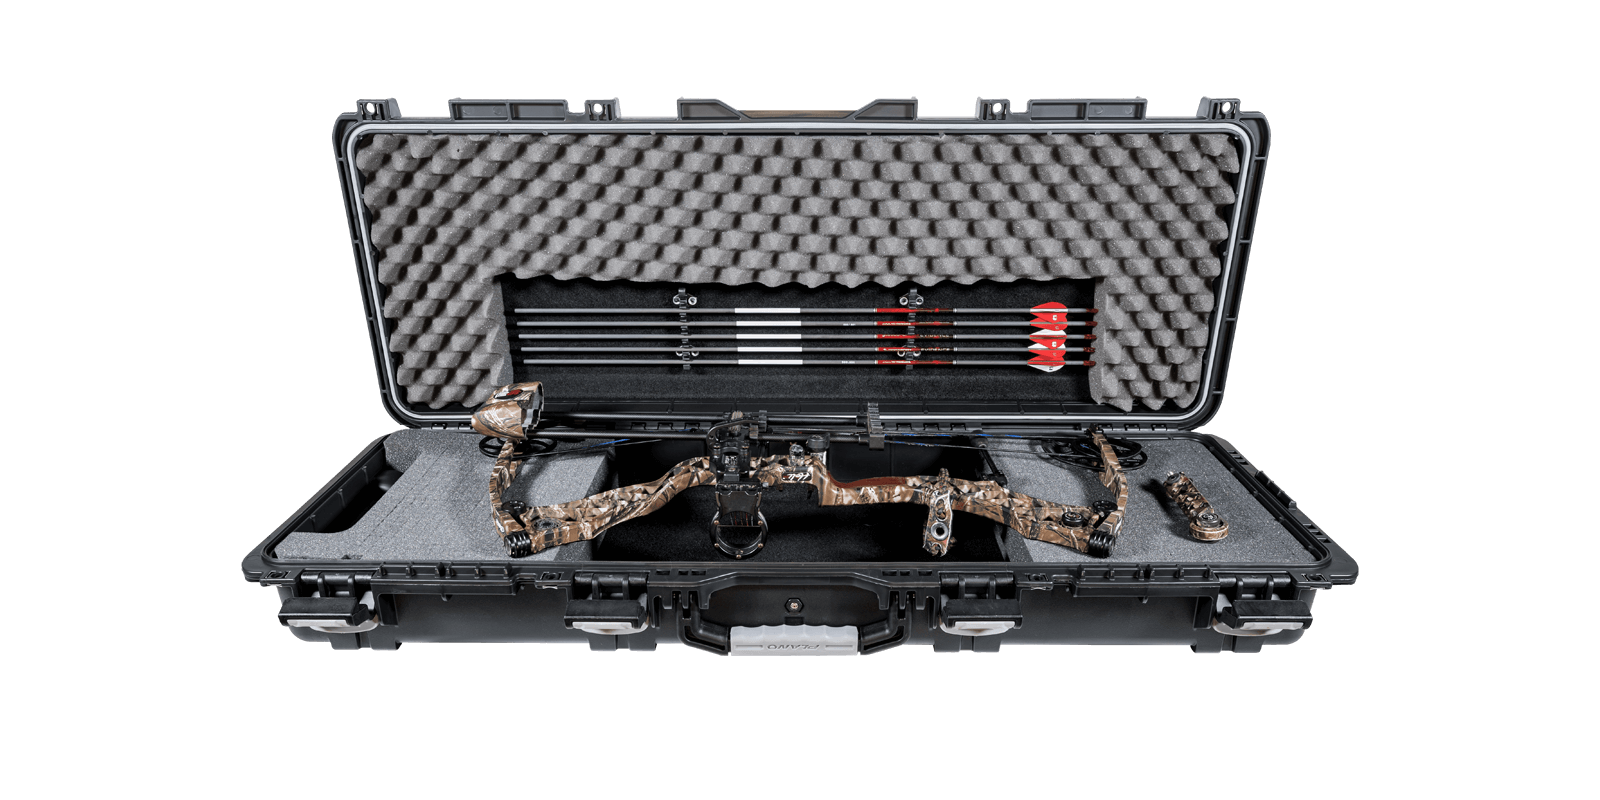 Plano Introduces the New Field Locker Element for Compound Bows